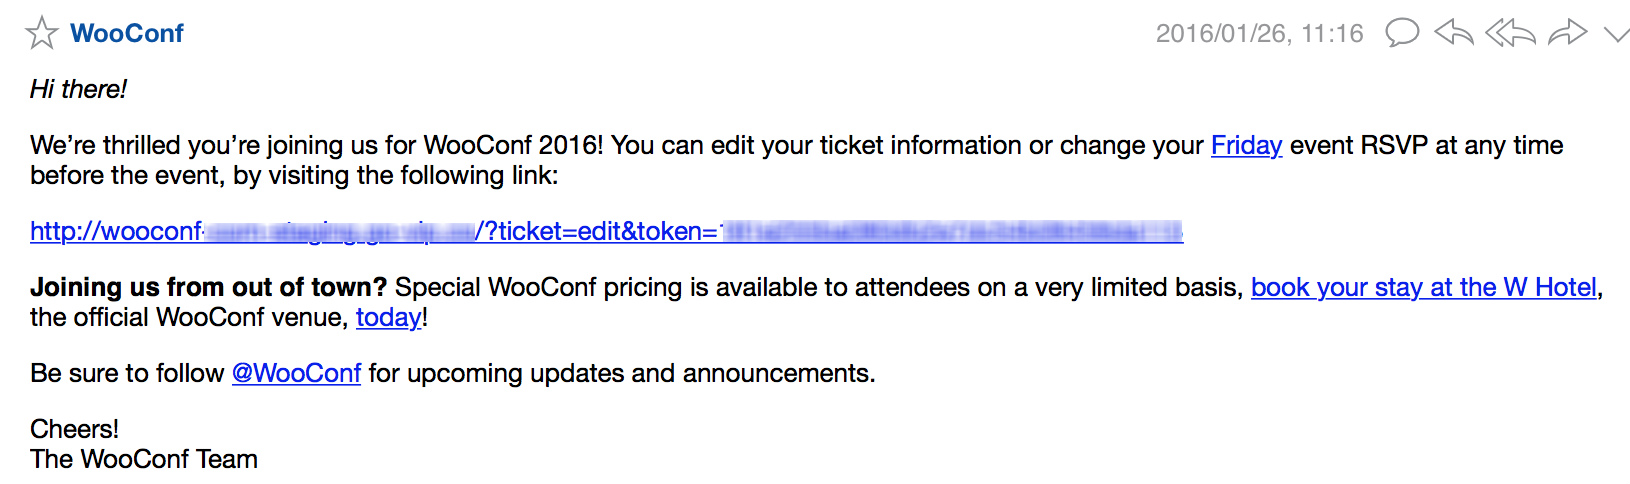 Ticket email caption